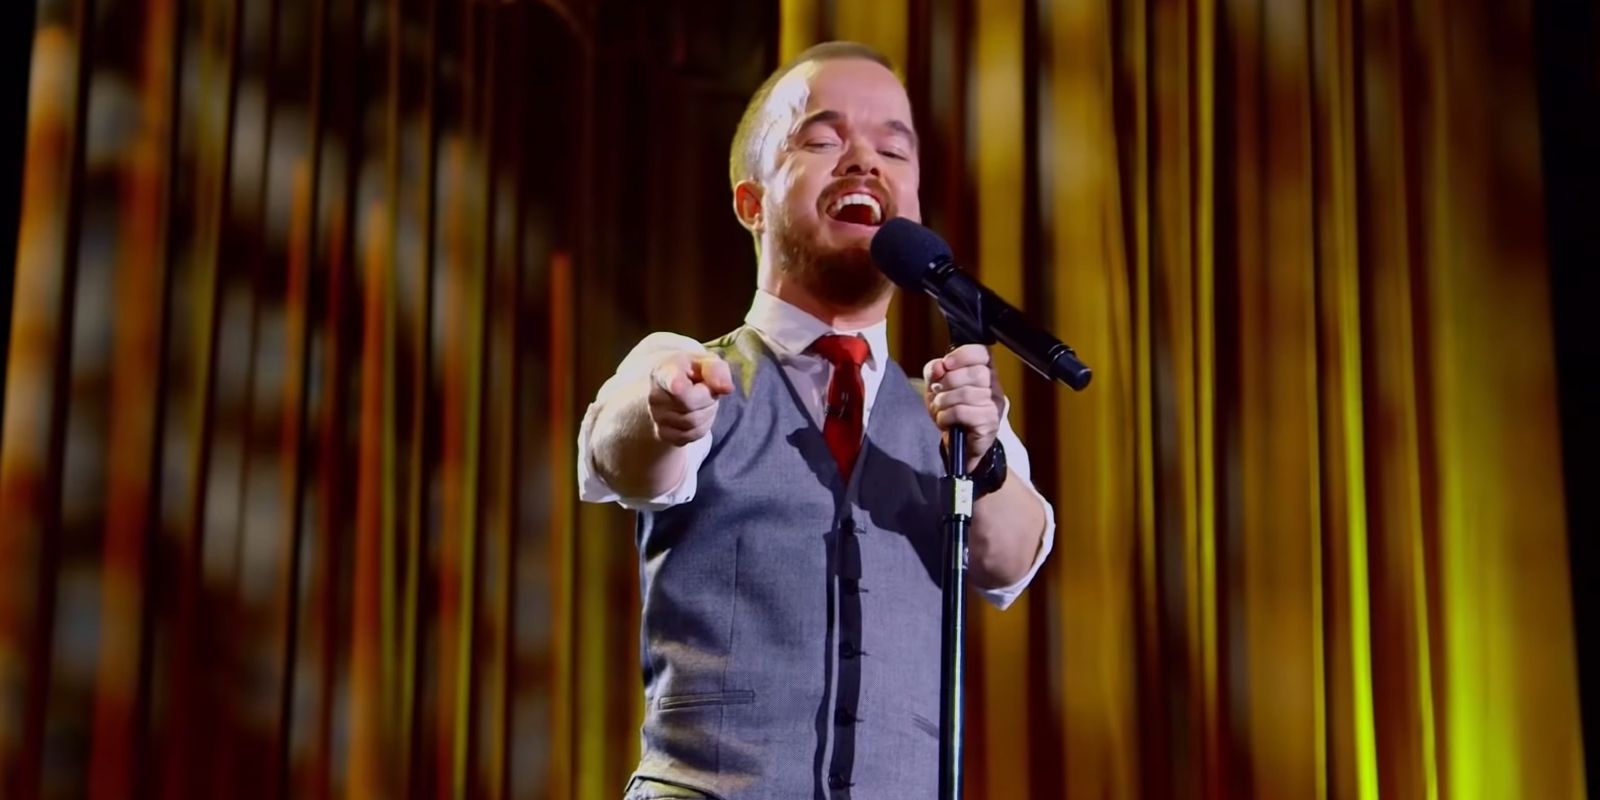 Brad Williams in Fun Size special pointing to an audience member and laughing on stage.